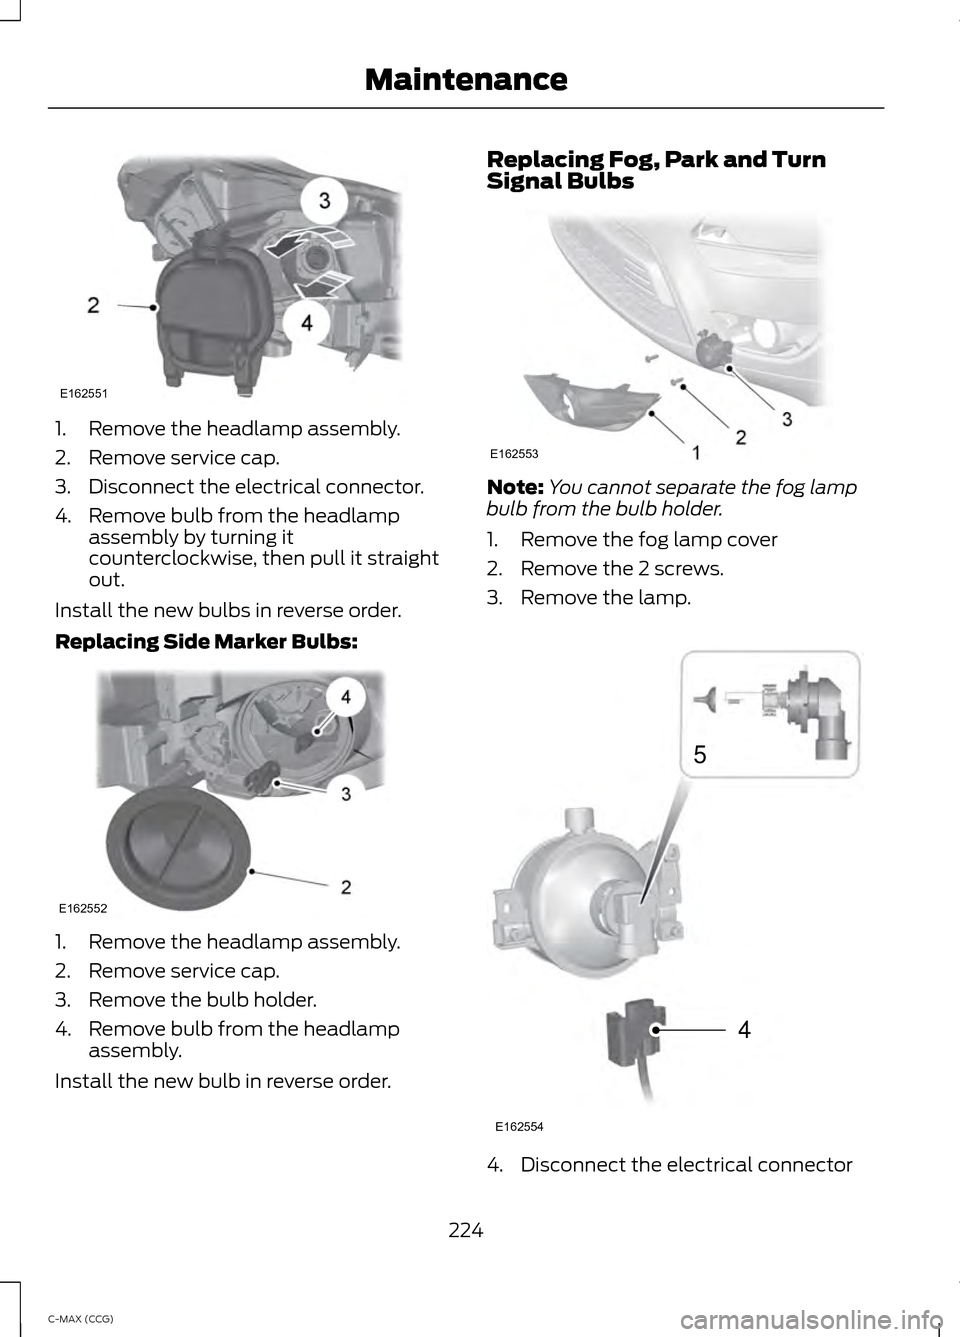 FORD C MAX HYBRID 2014 2.G Owners Manual 1. Remove the headlamp assembly.
2. Remove service cap.
3. Disconnect the electrical connector.
4. Remove bulb from the headlamp
assembly by turning it
counterclockwise, then pull it straight
out.
Ins